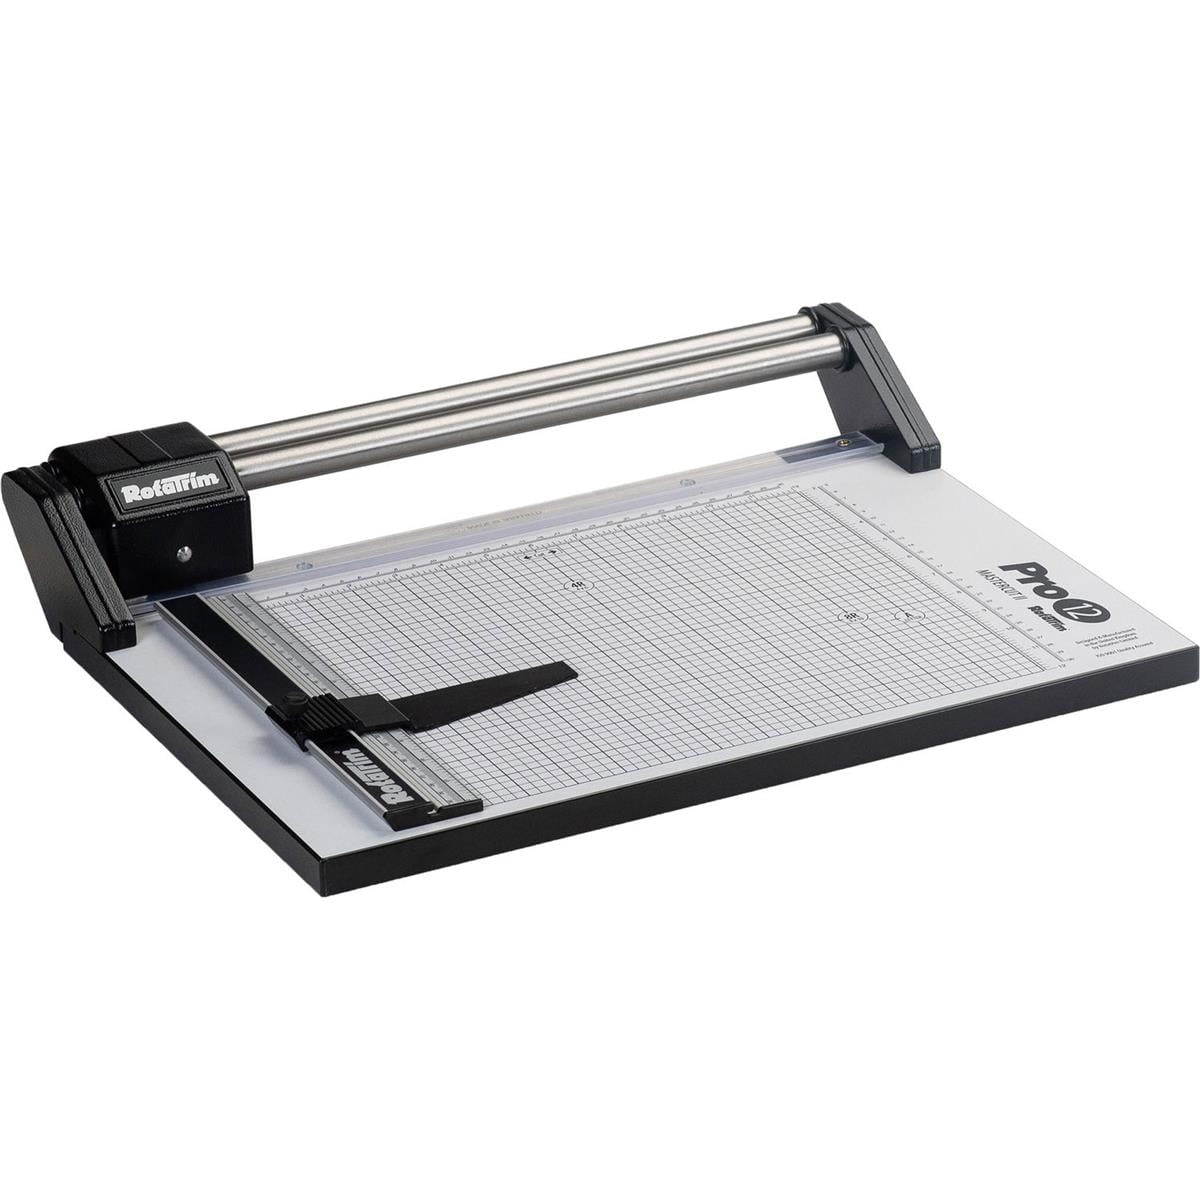 New 34In 860mm Portable Rotary Trimmer Photo Vinyl Paper Cutter 